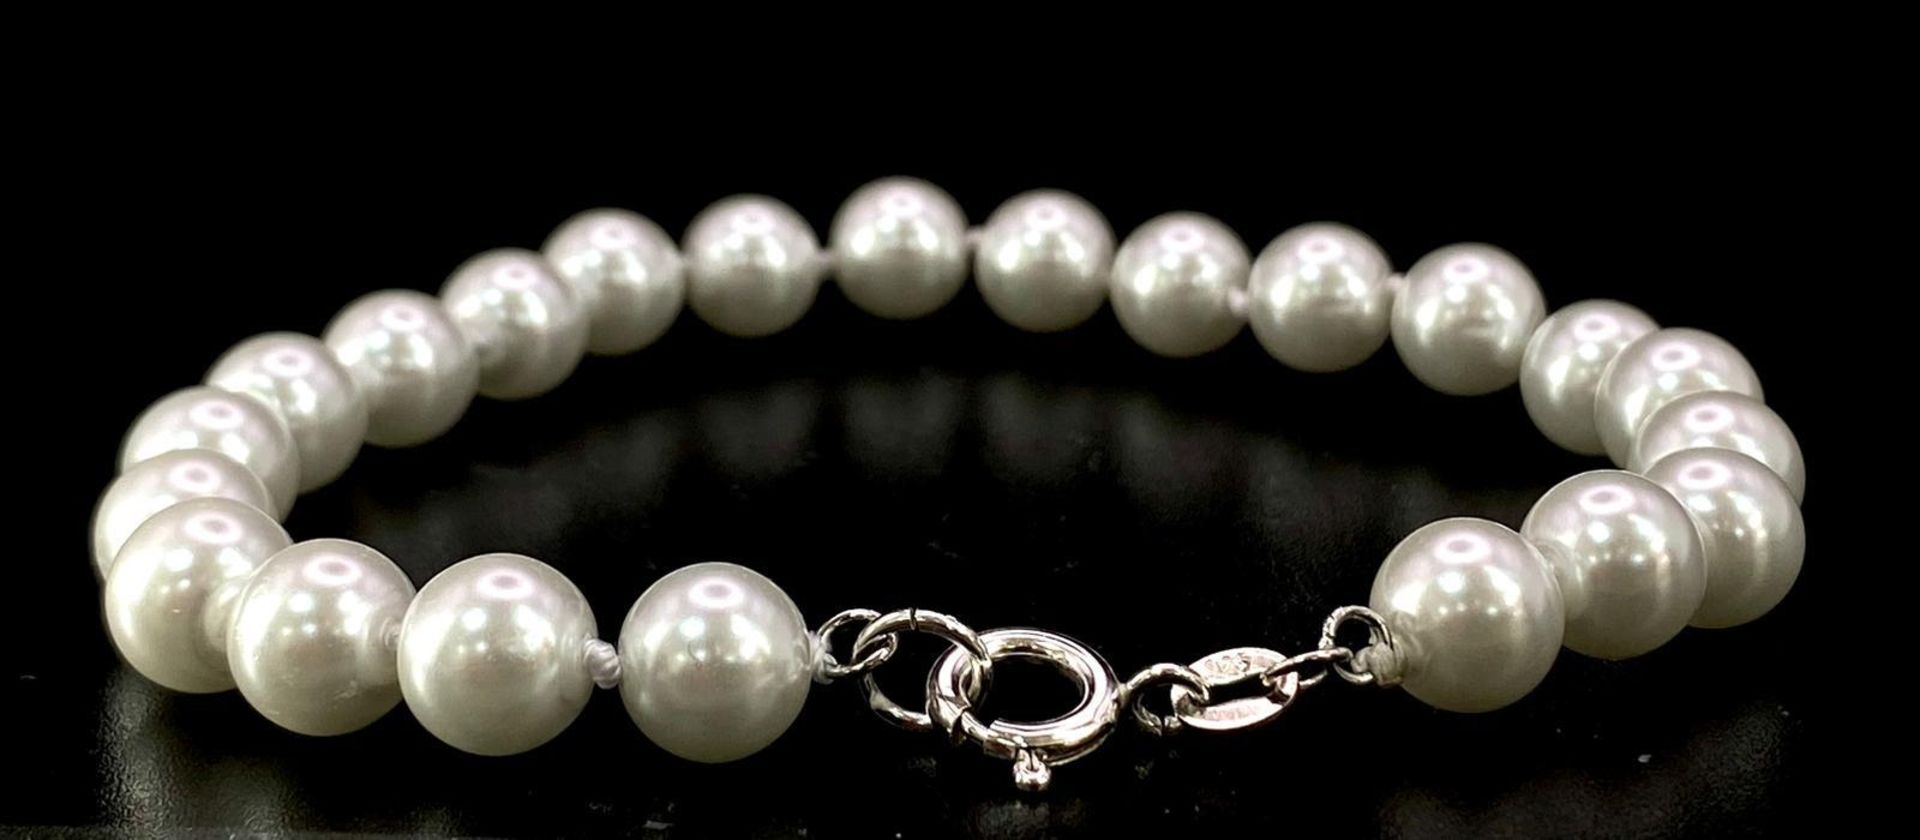 Bright Sterling Silver Cultured Pearl Necklace and Bracelet set. Necklace features an elegant dark - Bild 6 aus 10